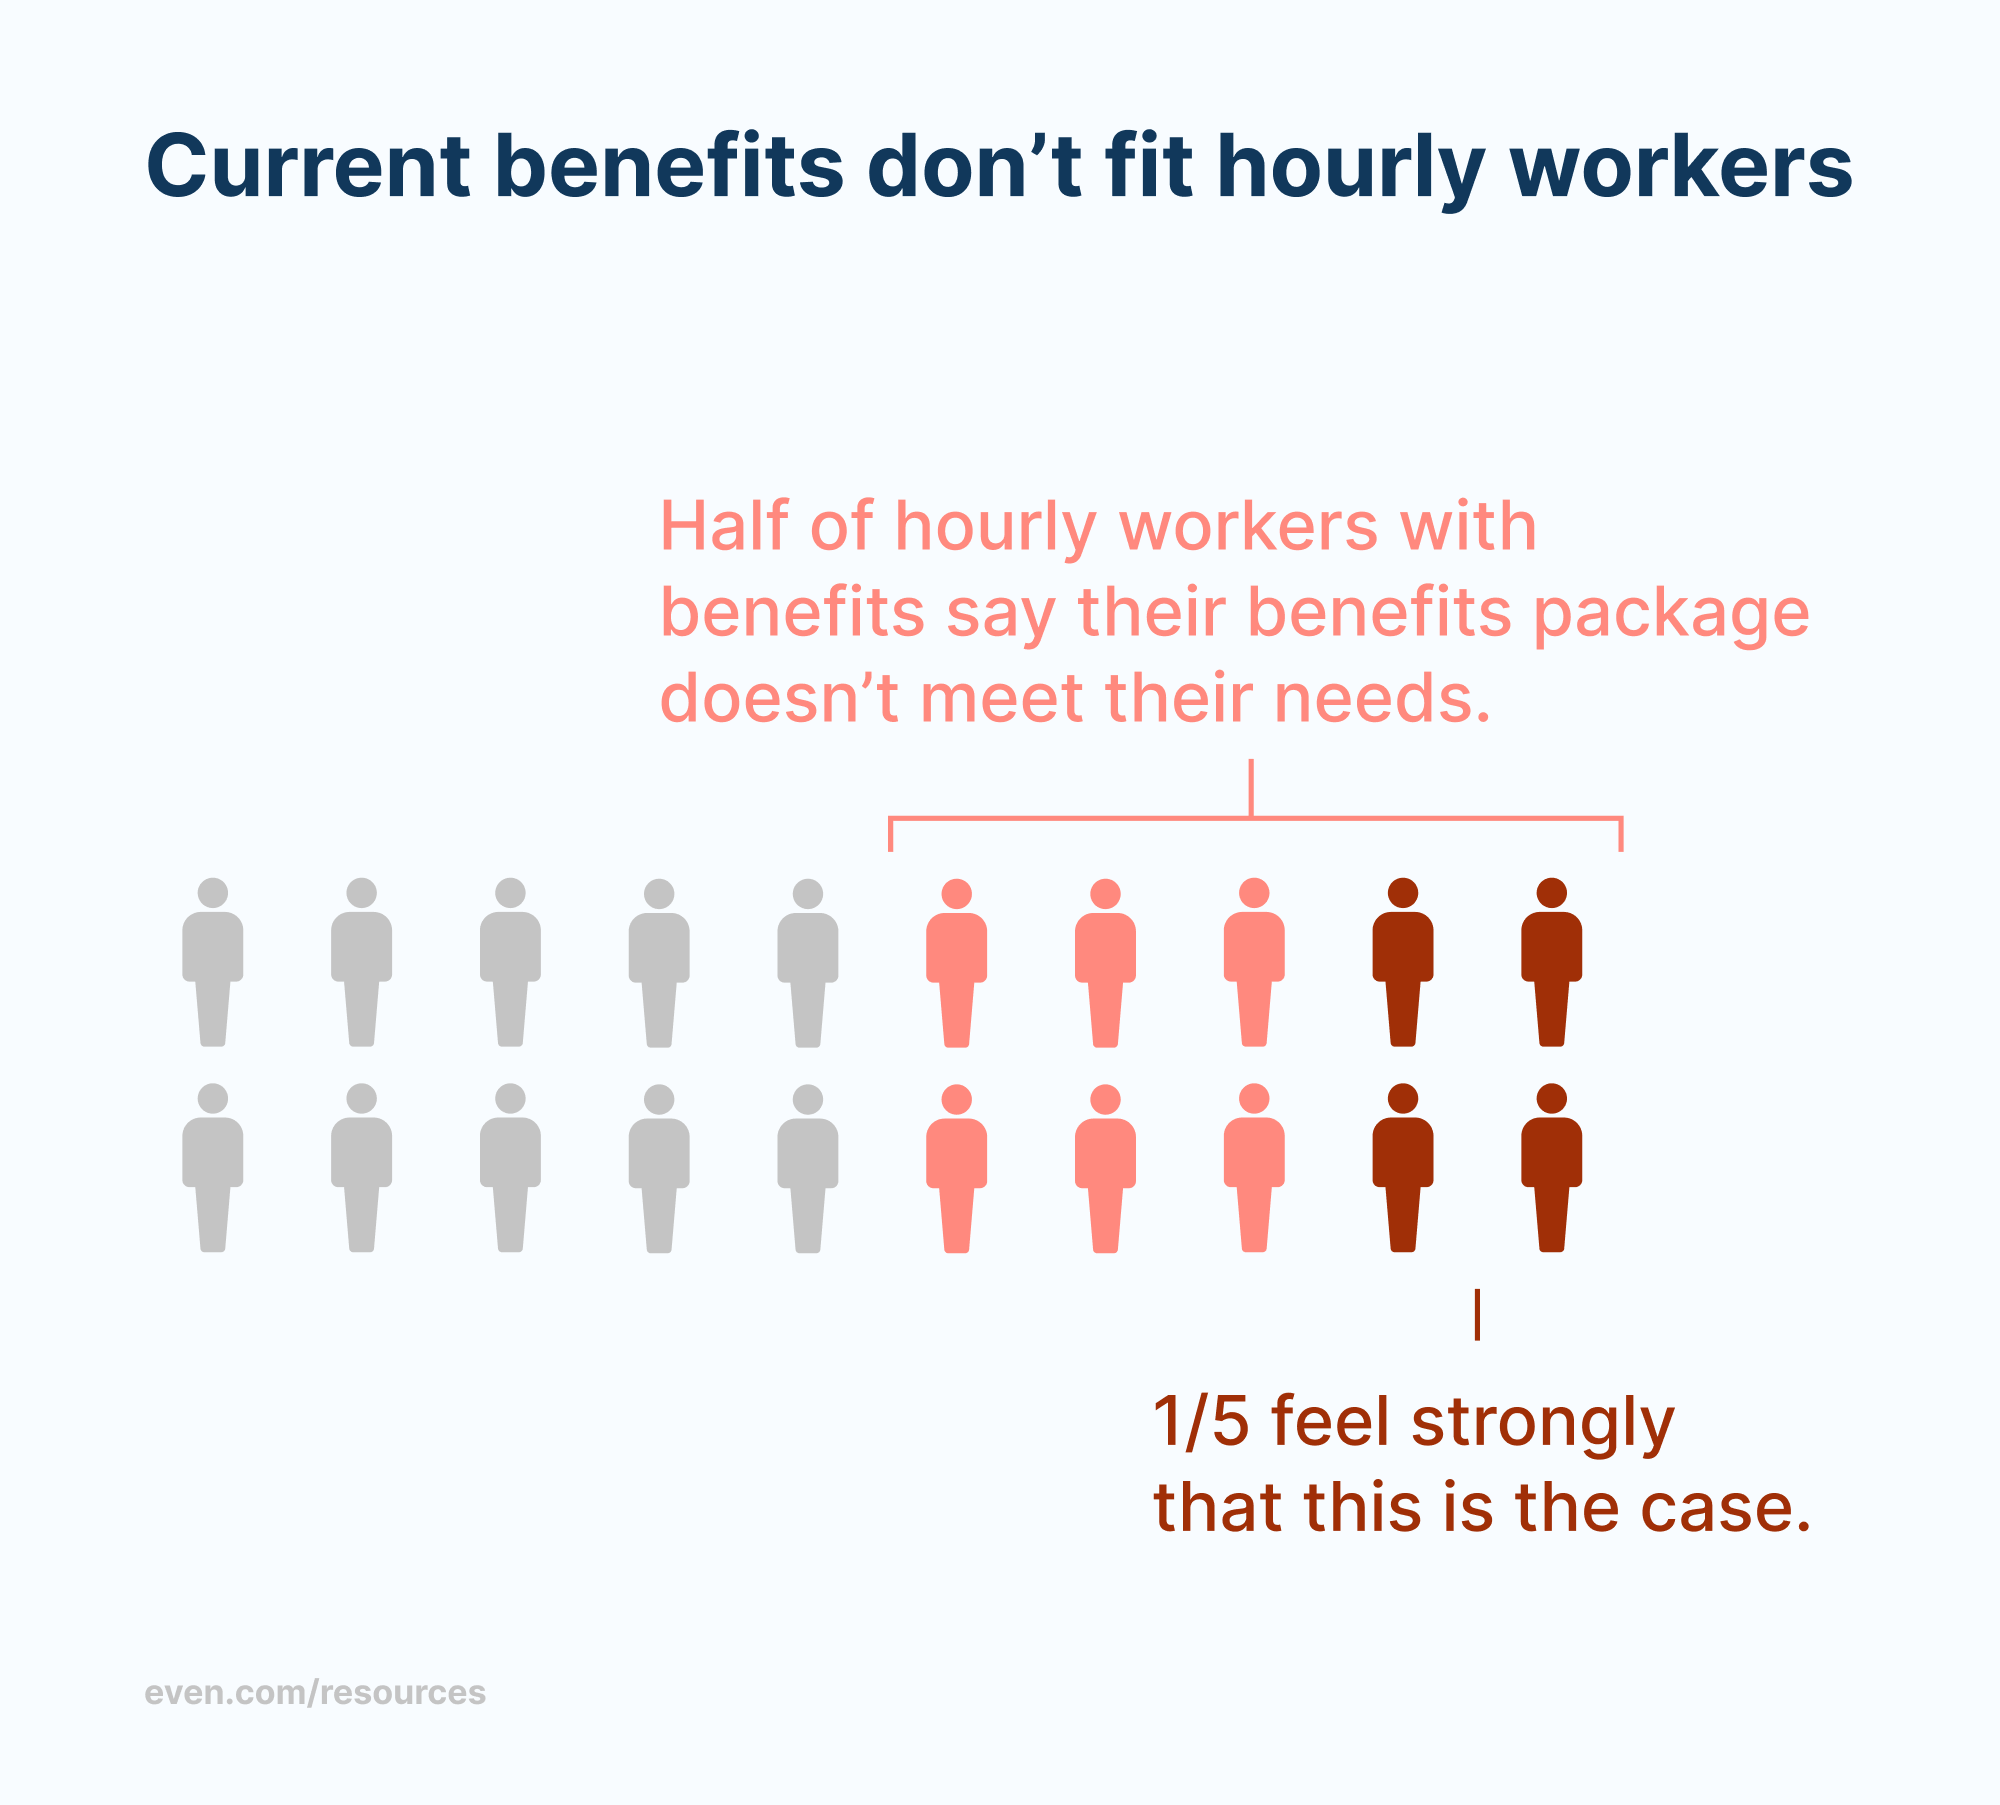 Infographic showing traditional benefits don't fit half of hourly workers